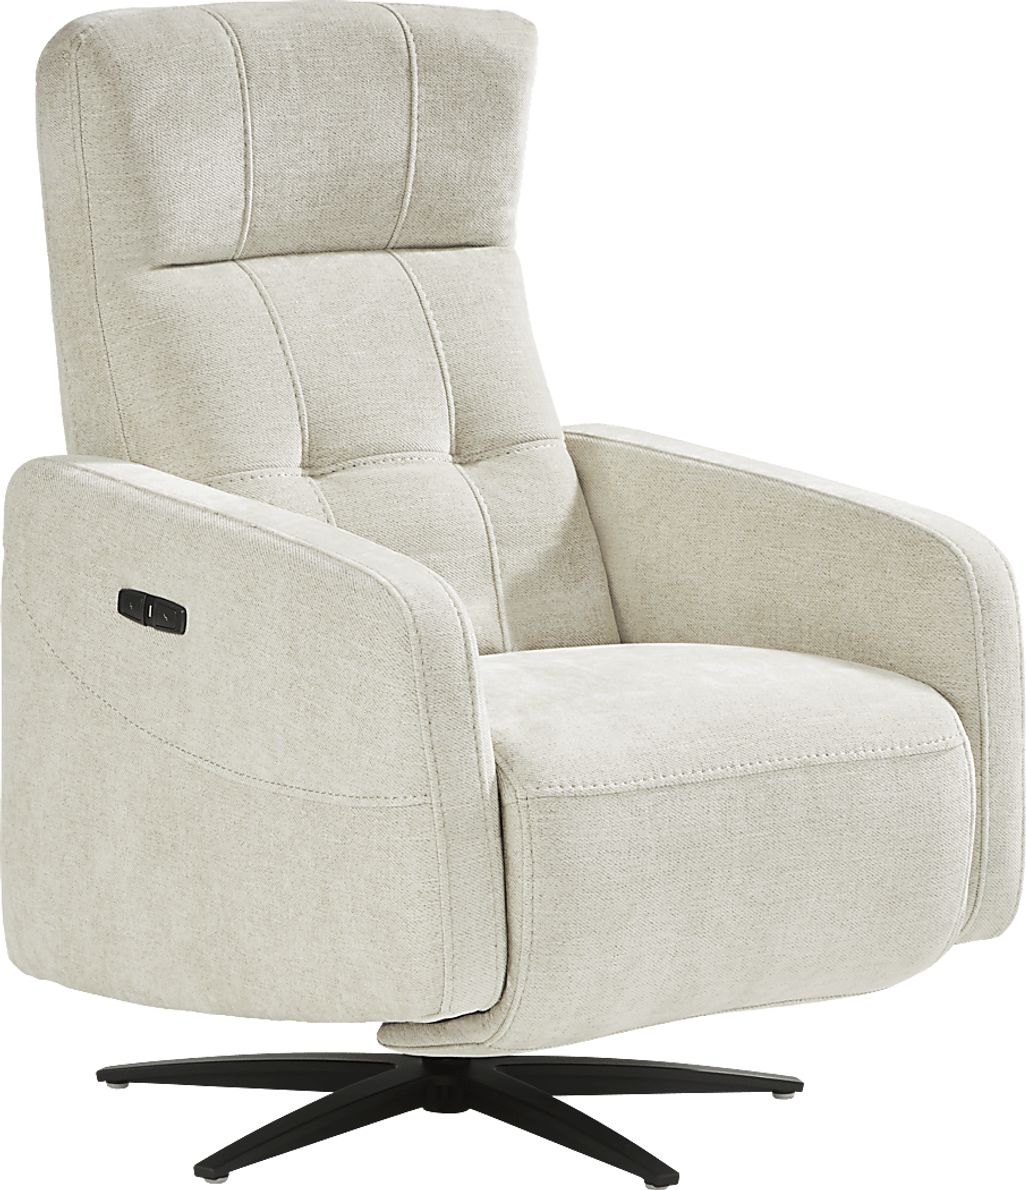 Weatherford Park Power Recliner